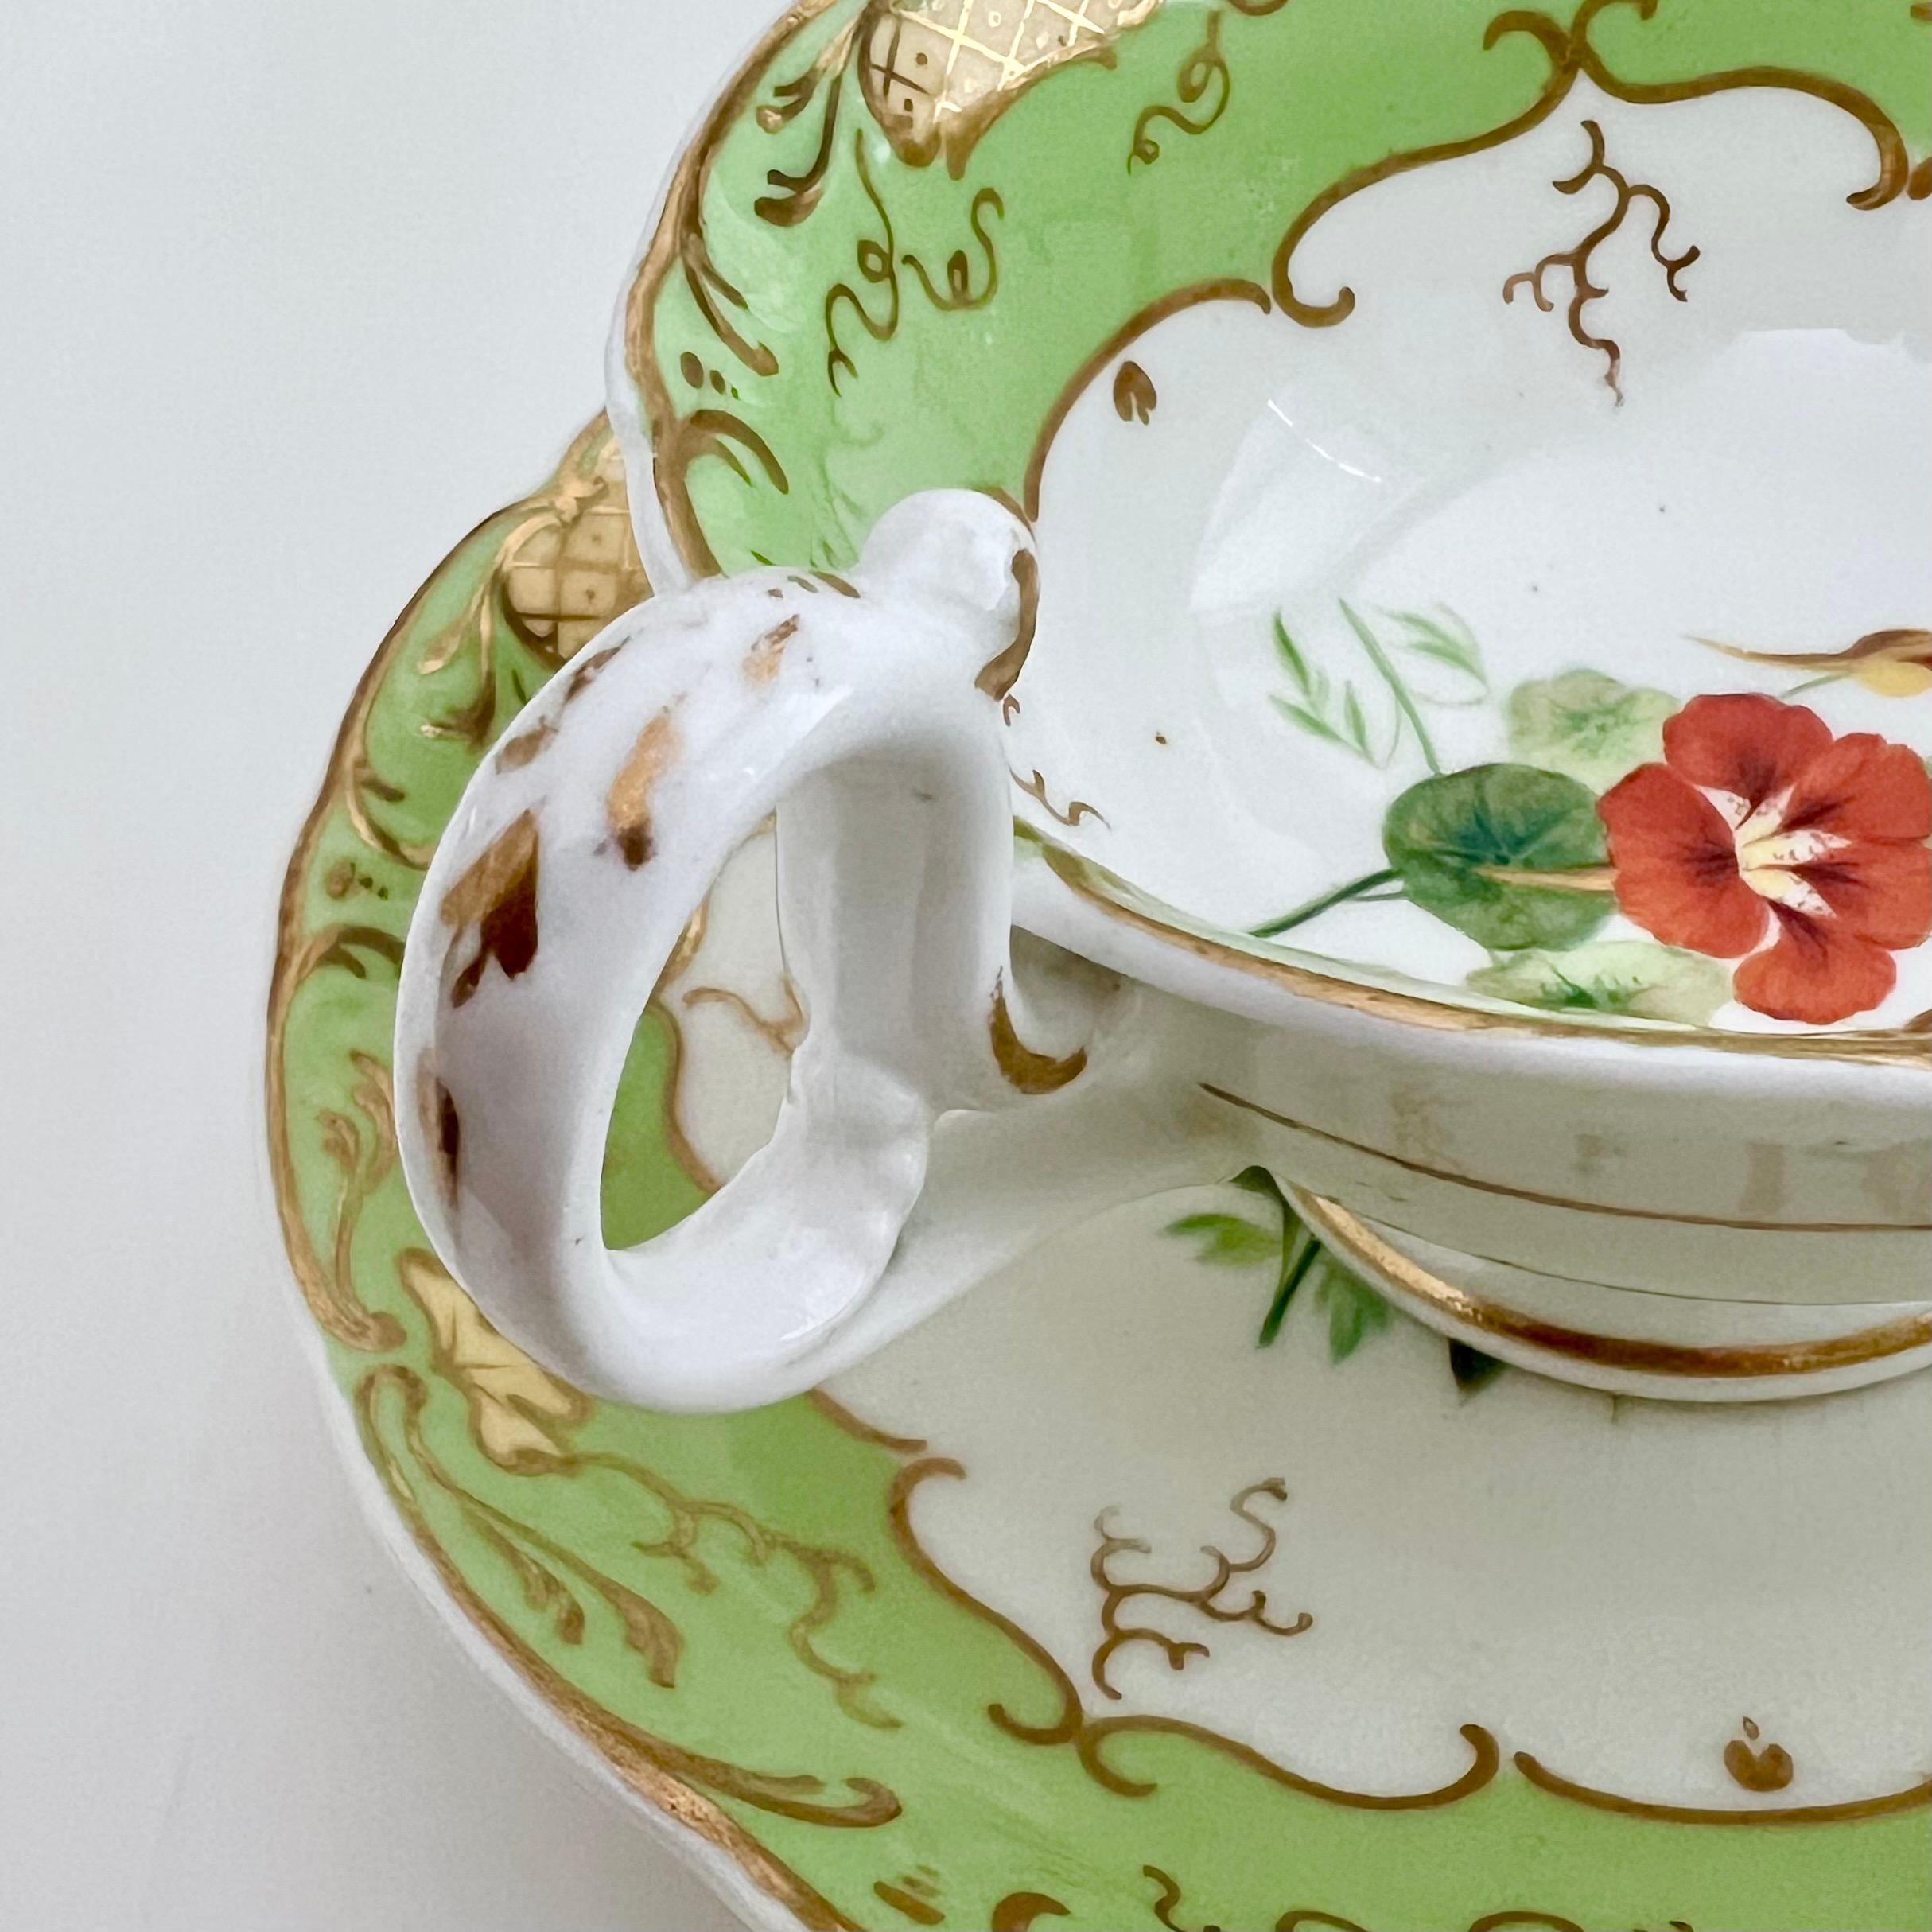 Teacup H&R Daniel, Apple Green with Red Flowers, Rococo Revival, circa 1840 6